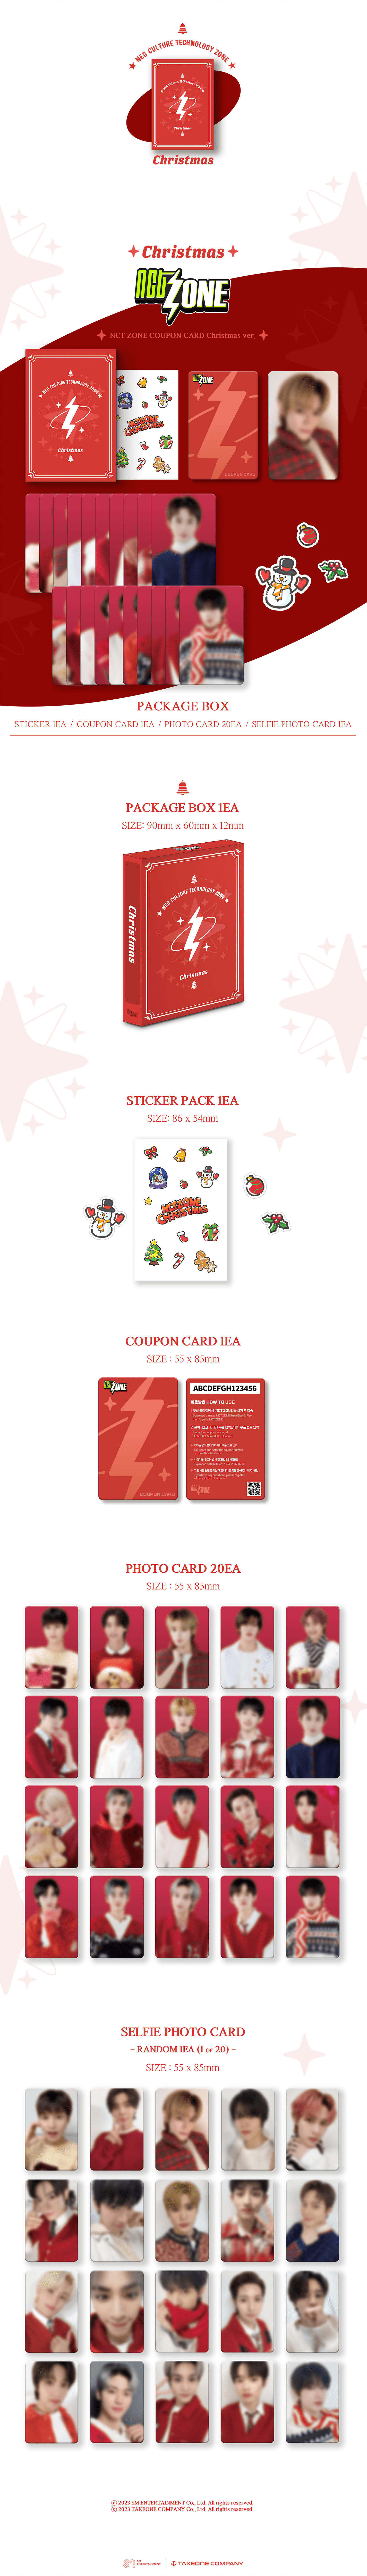 NCT ZONE Coupon Card (CHRISTMAS Version)